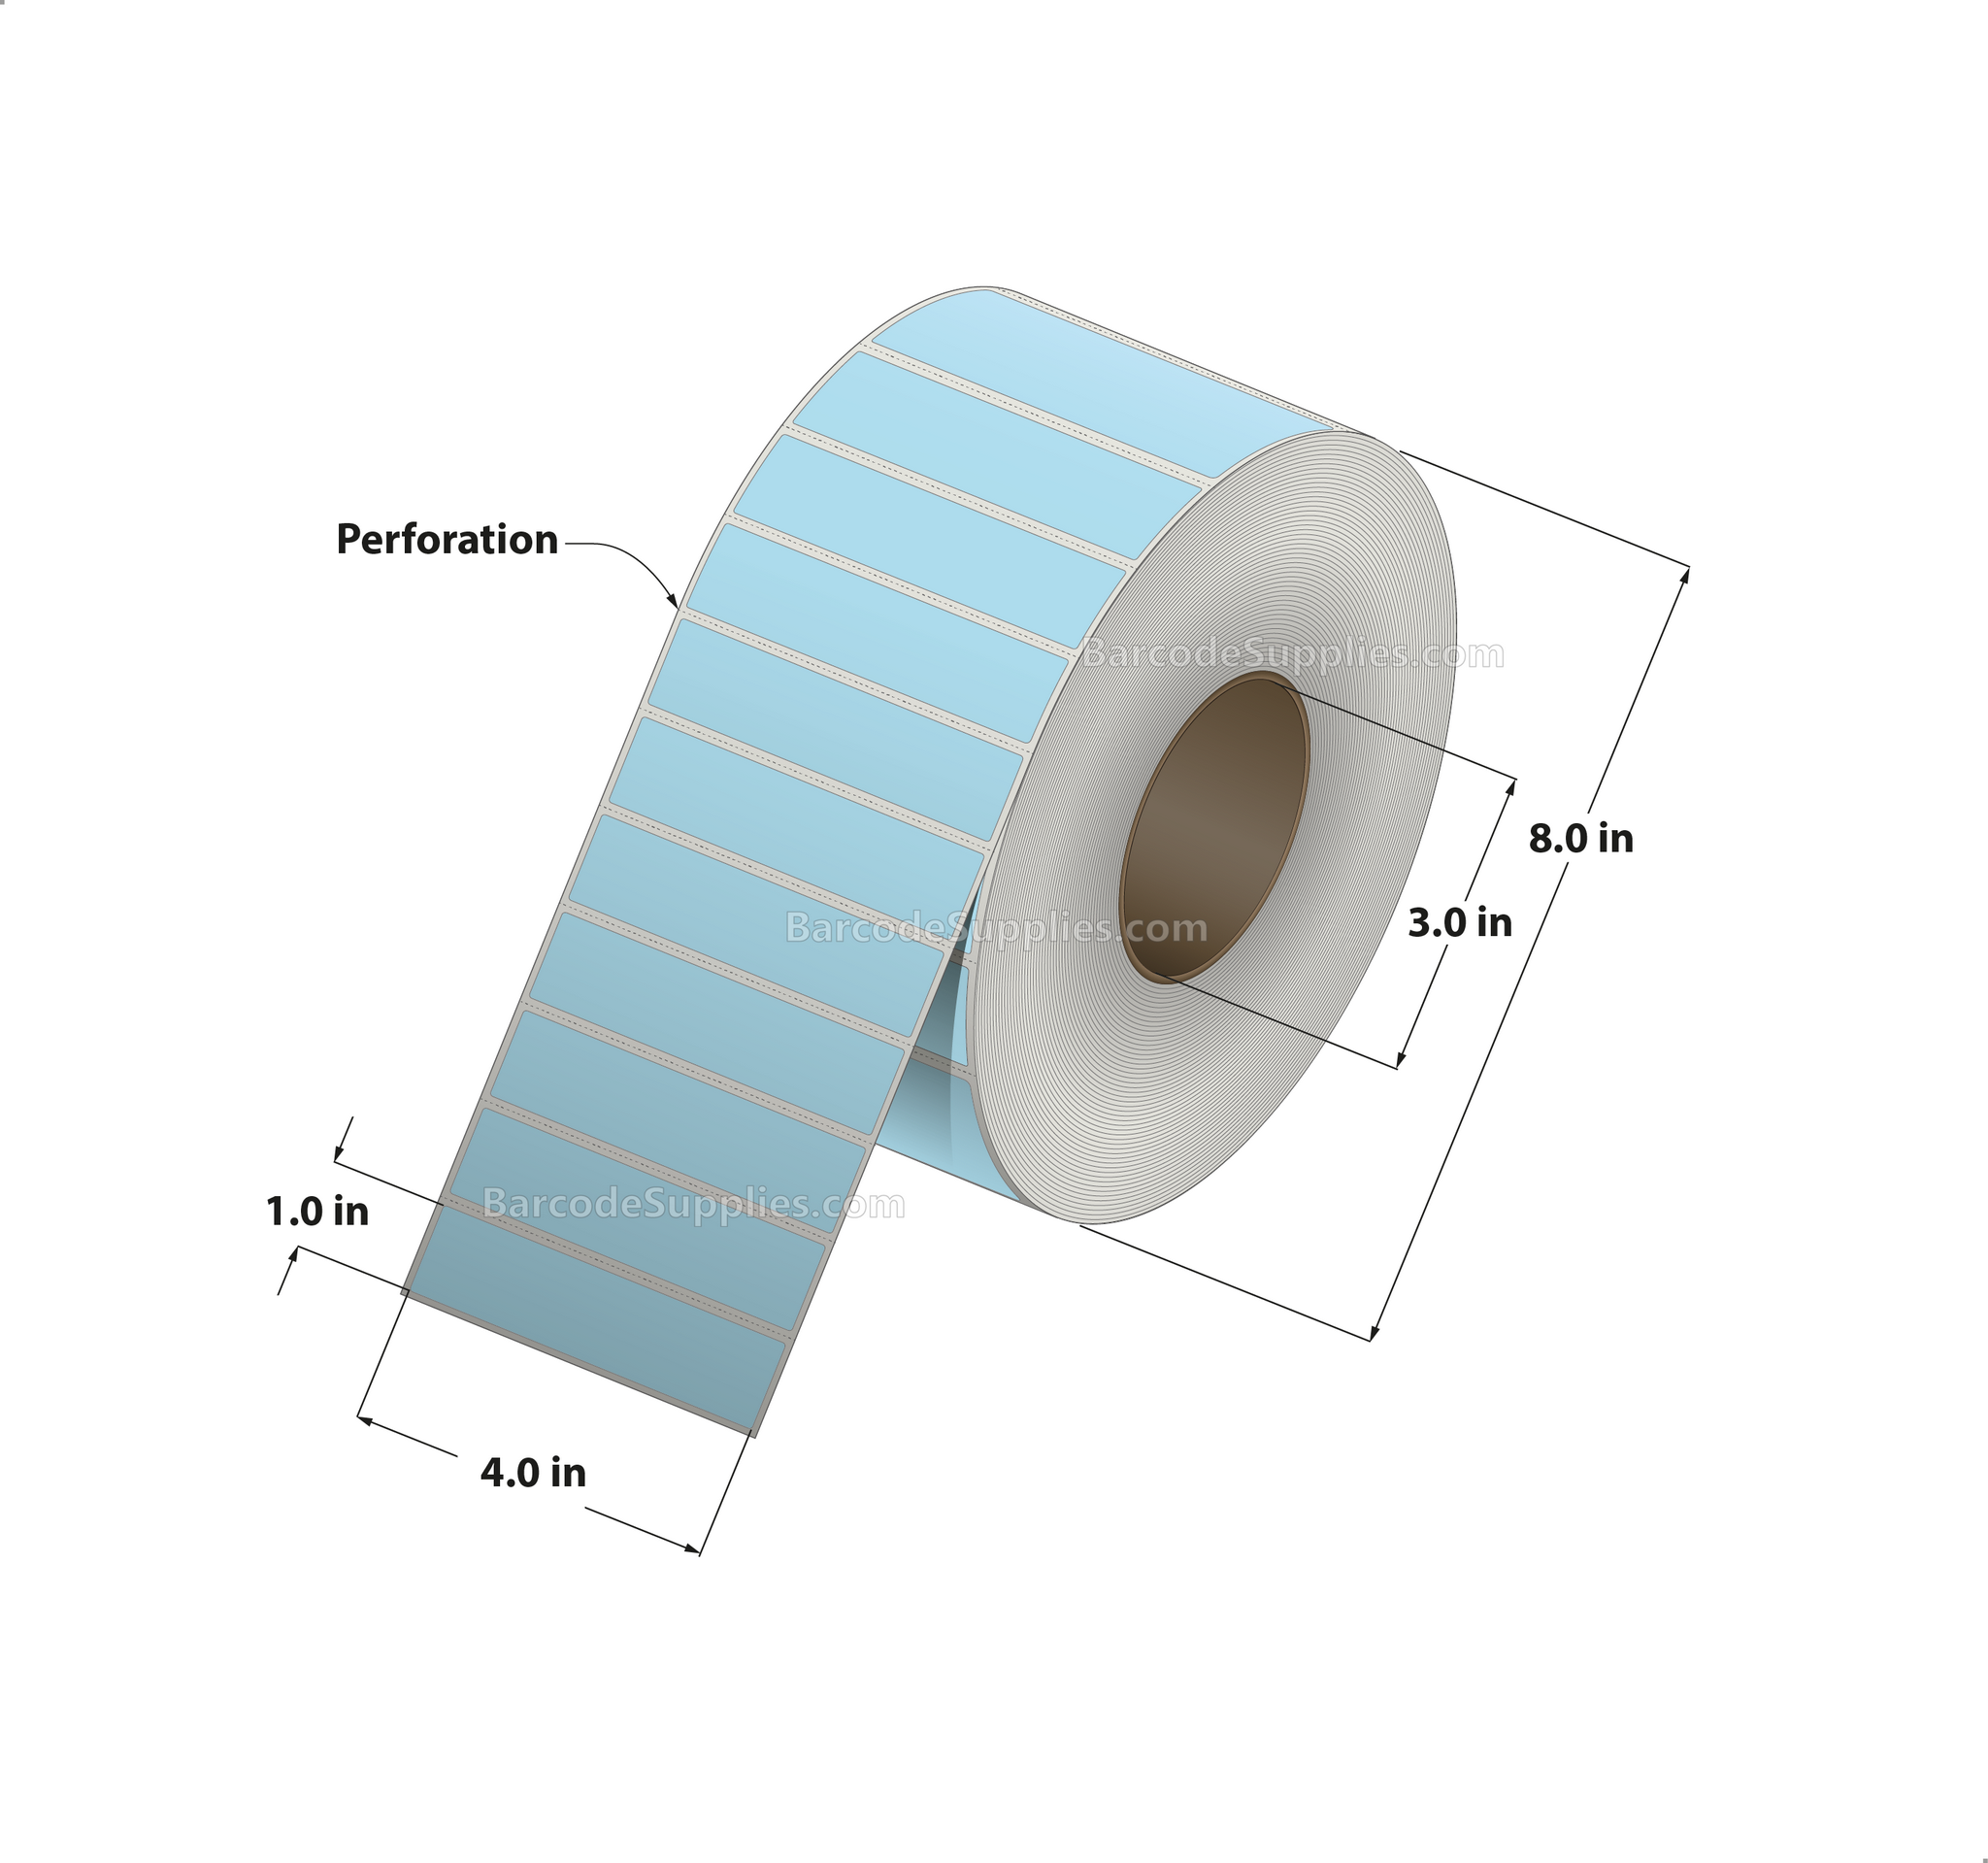 4 x 1 Thermal Transfer 290 Blue Labels With Permanent Adhesive - Perforated - 5500 Labels Per Roll - Carton Of 4 Rolls - 22000 Labels Total - MPN: RFC-4-1-5500-BL